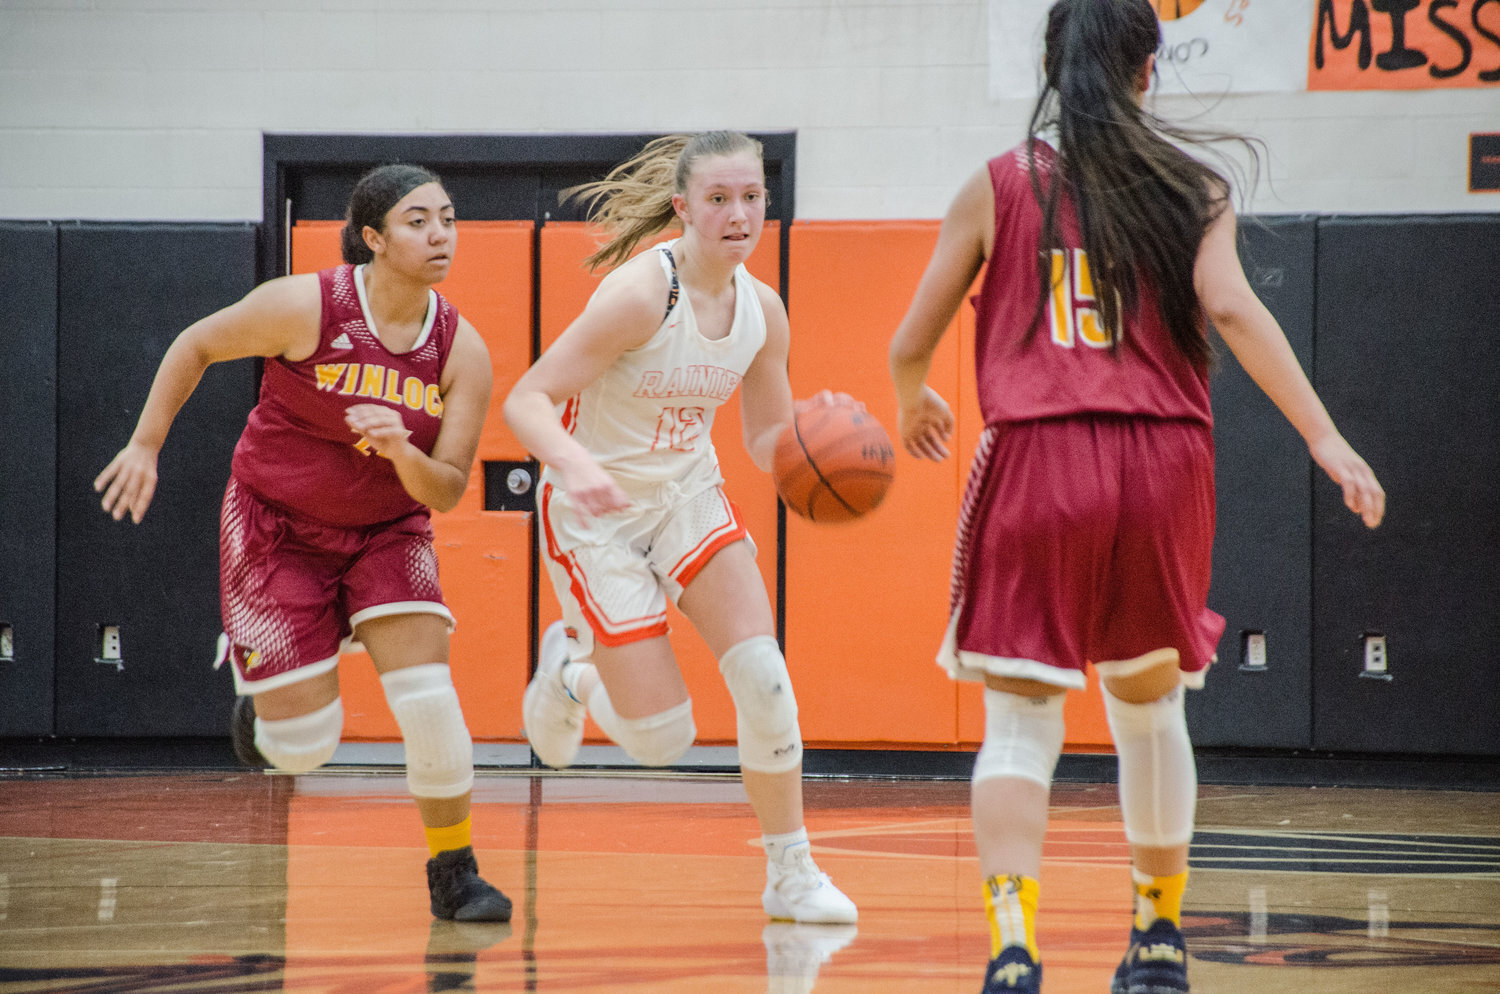 Schultz has averaged more than 20 points a game for Rainier. In the competitive Central 2B, it would almost seem impossible for the sophomore to be able to reach 1,000 career points so soon — but she did anyways. The next question is: 1,000 more?